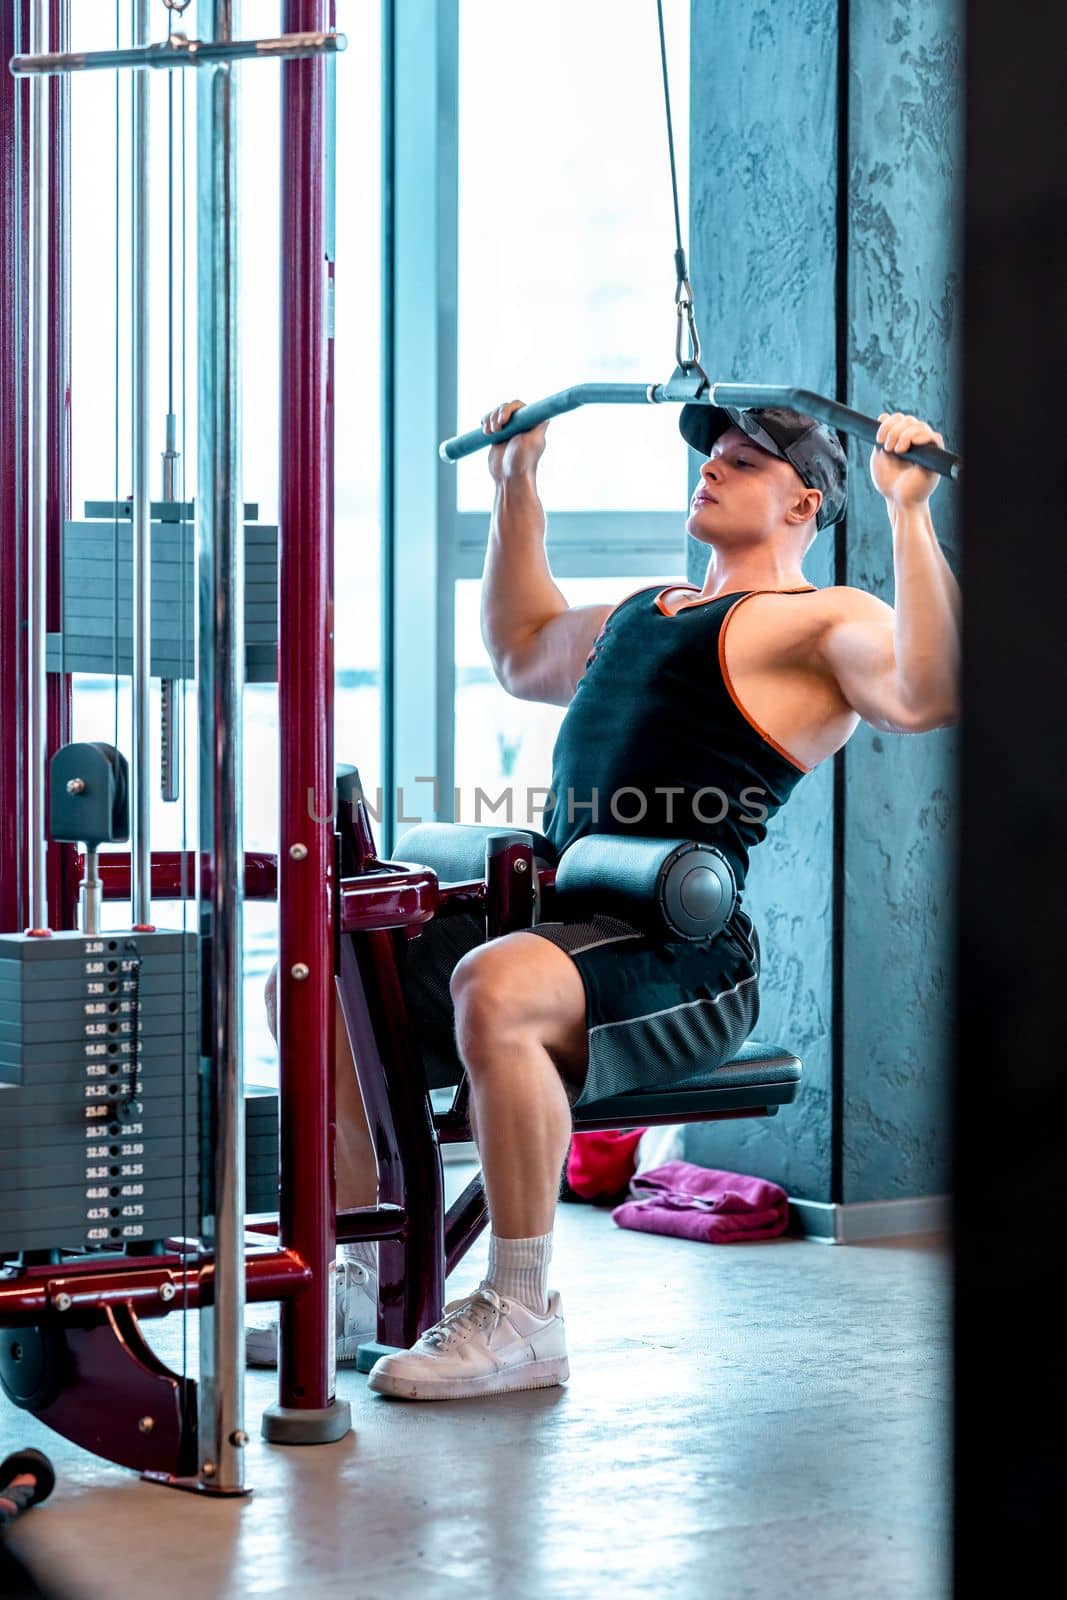 exercise of the back muscles by pulling the pulley on the strength machine by Edophoto